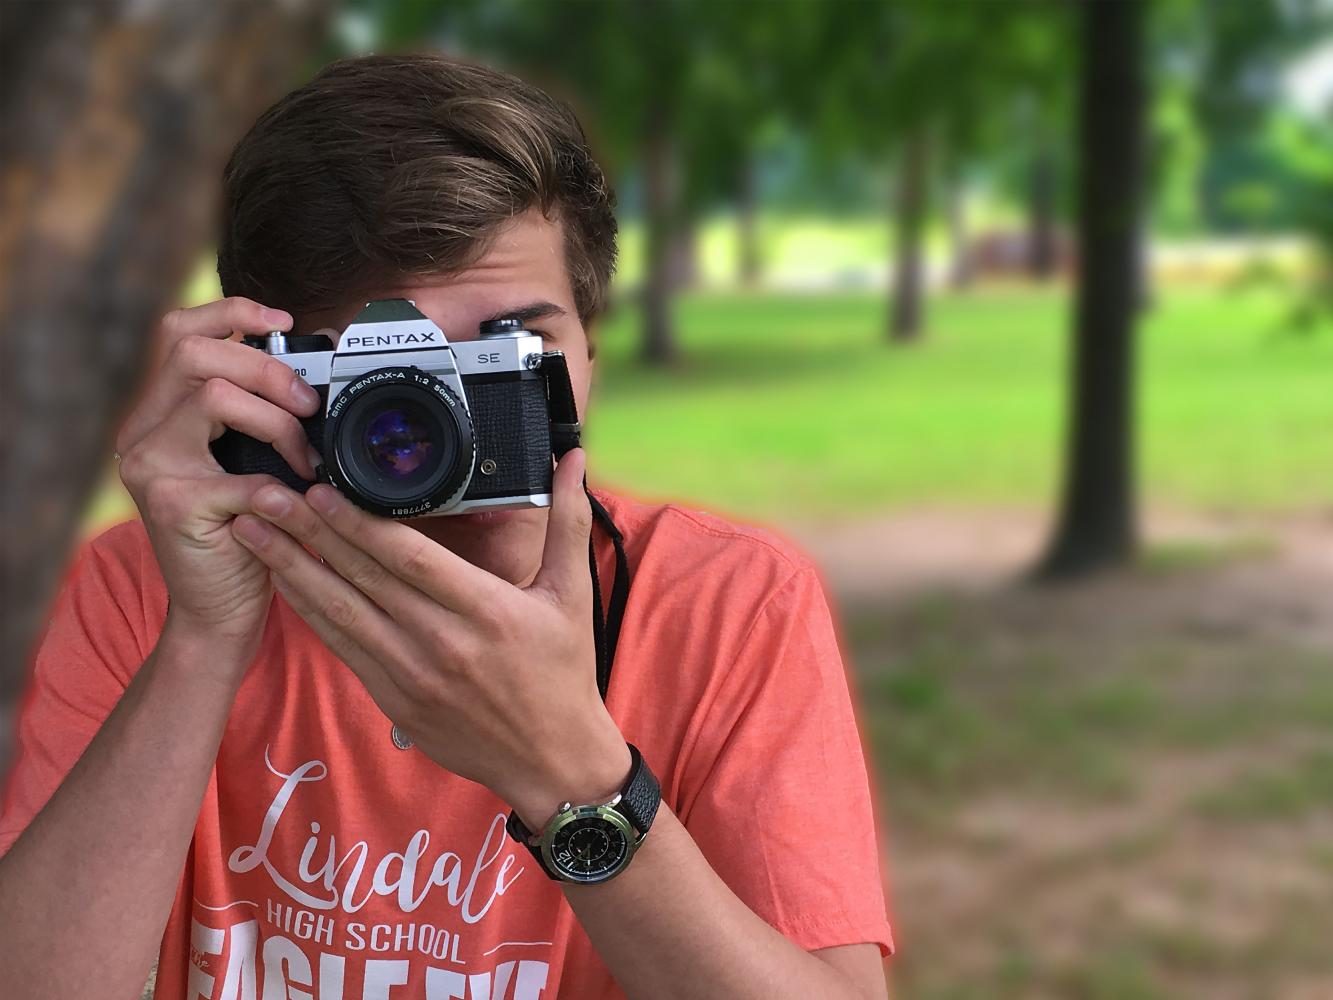 Wyatt+takes+photos+for+the+LHS+Eagle+Eye+magazine.+He+will+use+the+skills+learned+in+Costa+Rica+to+better+improve+his+photography+for+personal+use+and+for+school